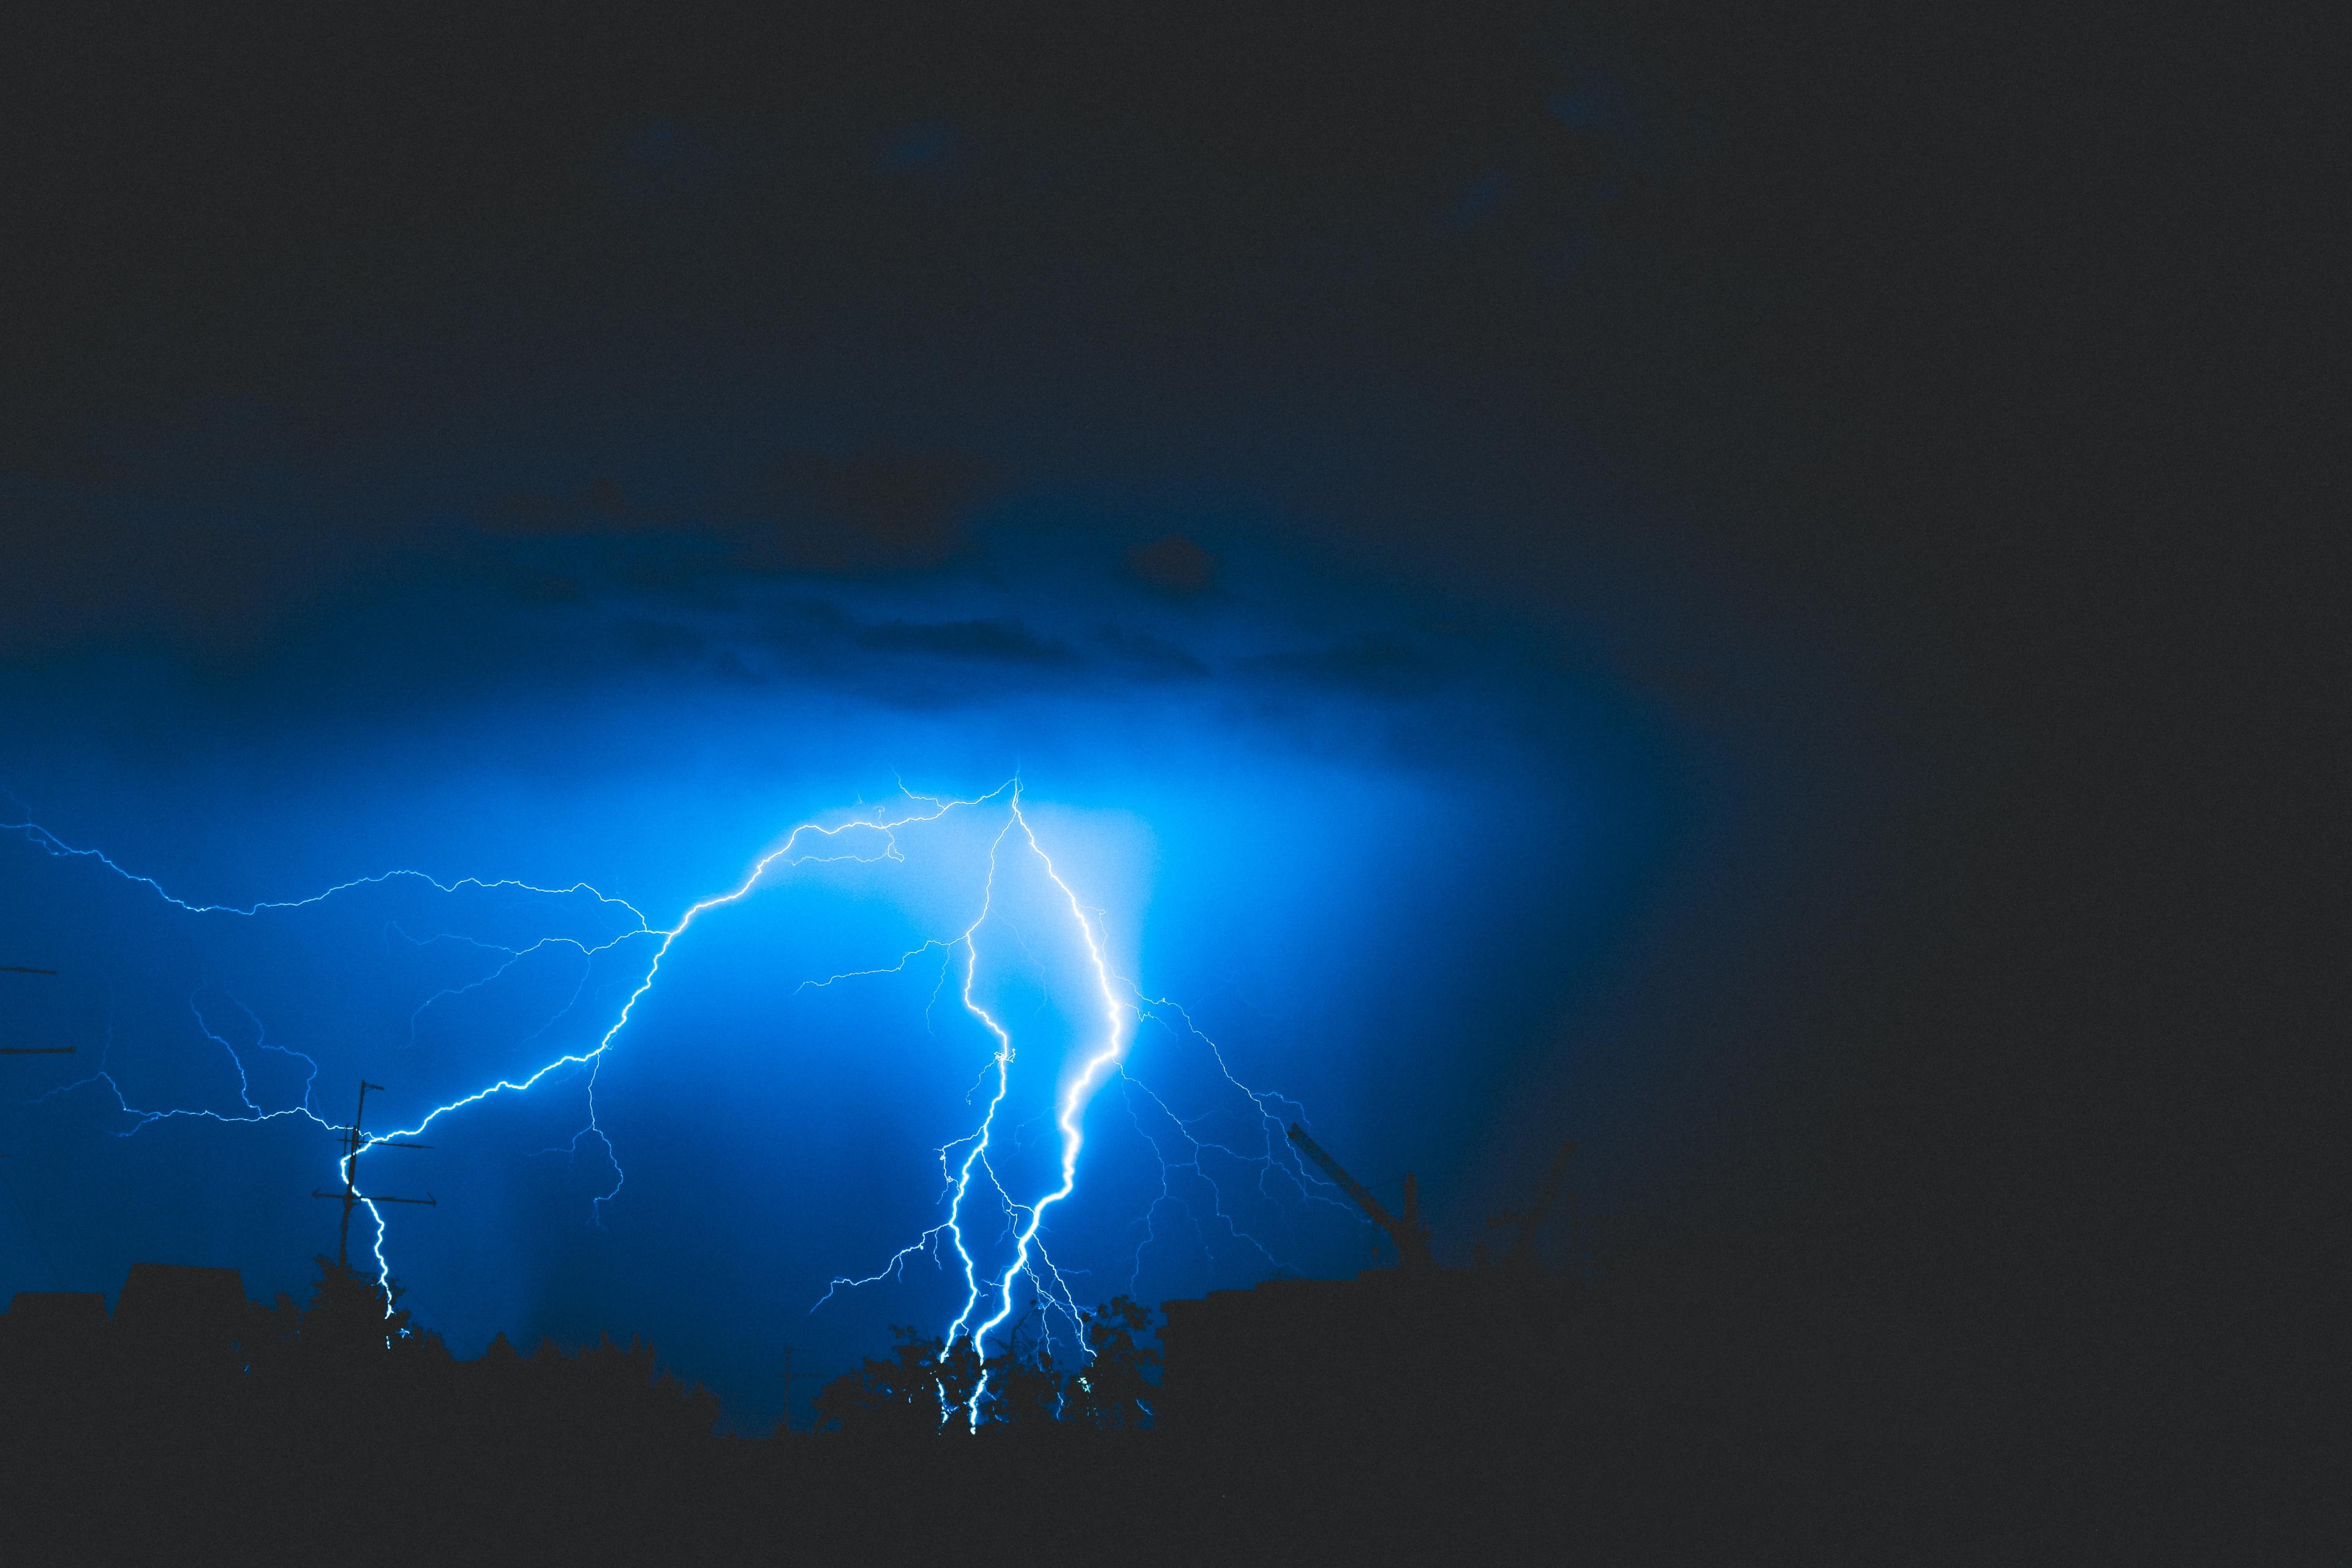 A picture of lightning striking from the sky to the ground by Alex Dukhanov on Unsplash